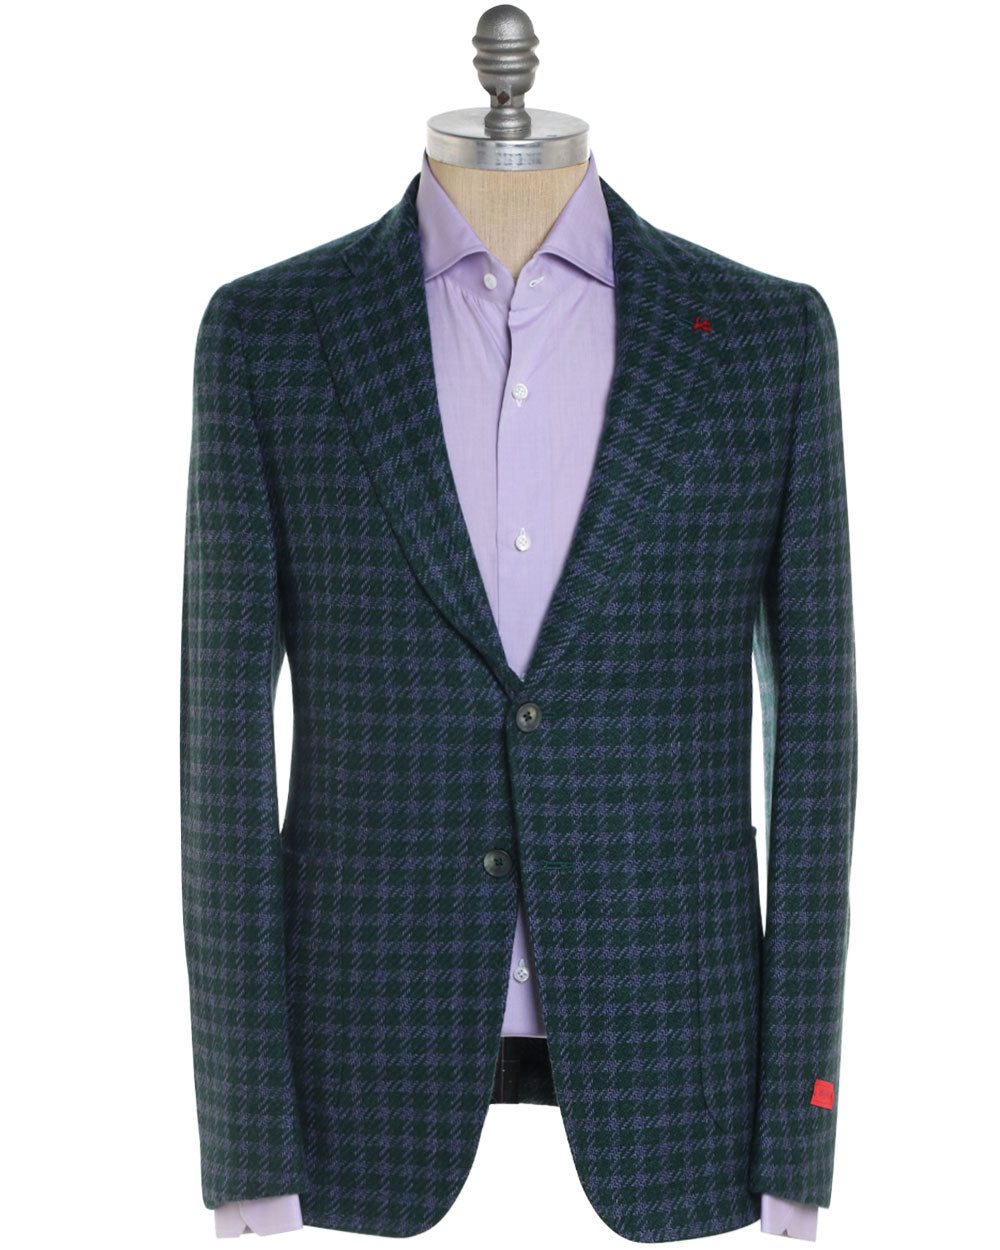 Green and Lavender Cashmere Checked Sportcoat